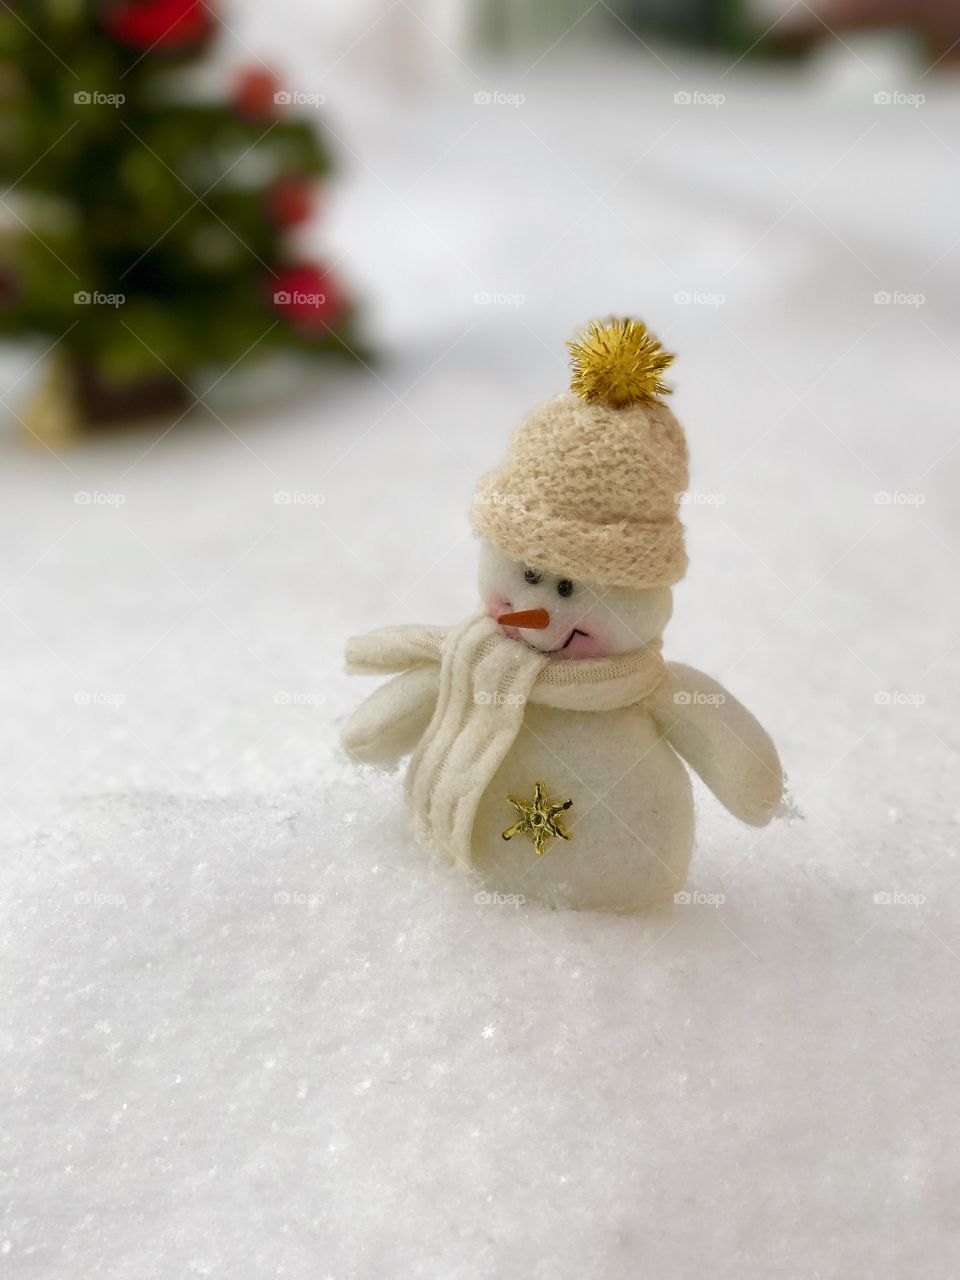 little snowman standing in the snow, behind a blurred background with a festive Christmas tree